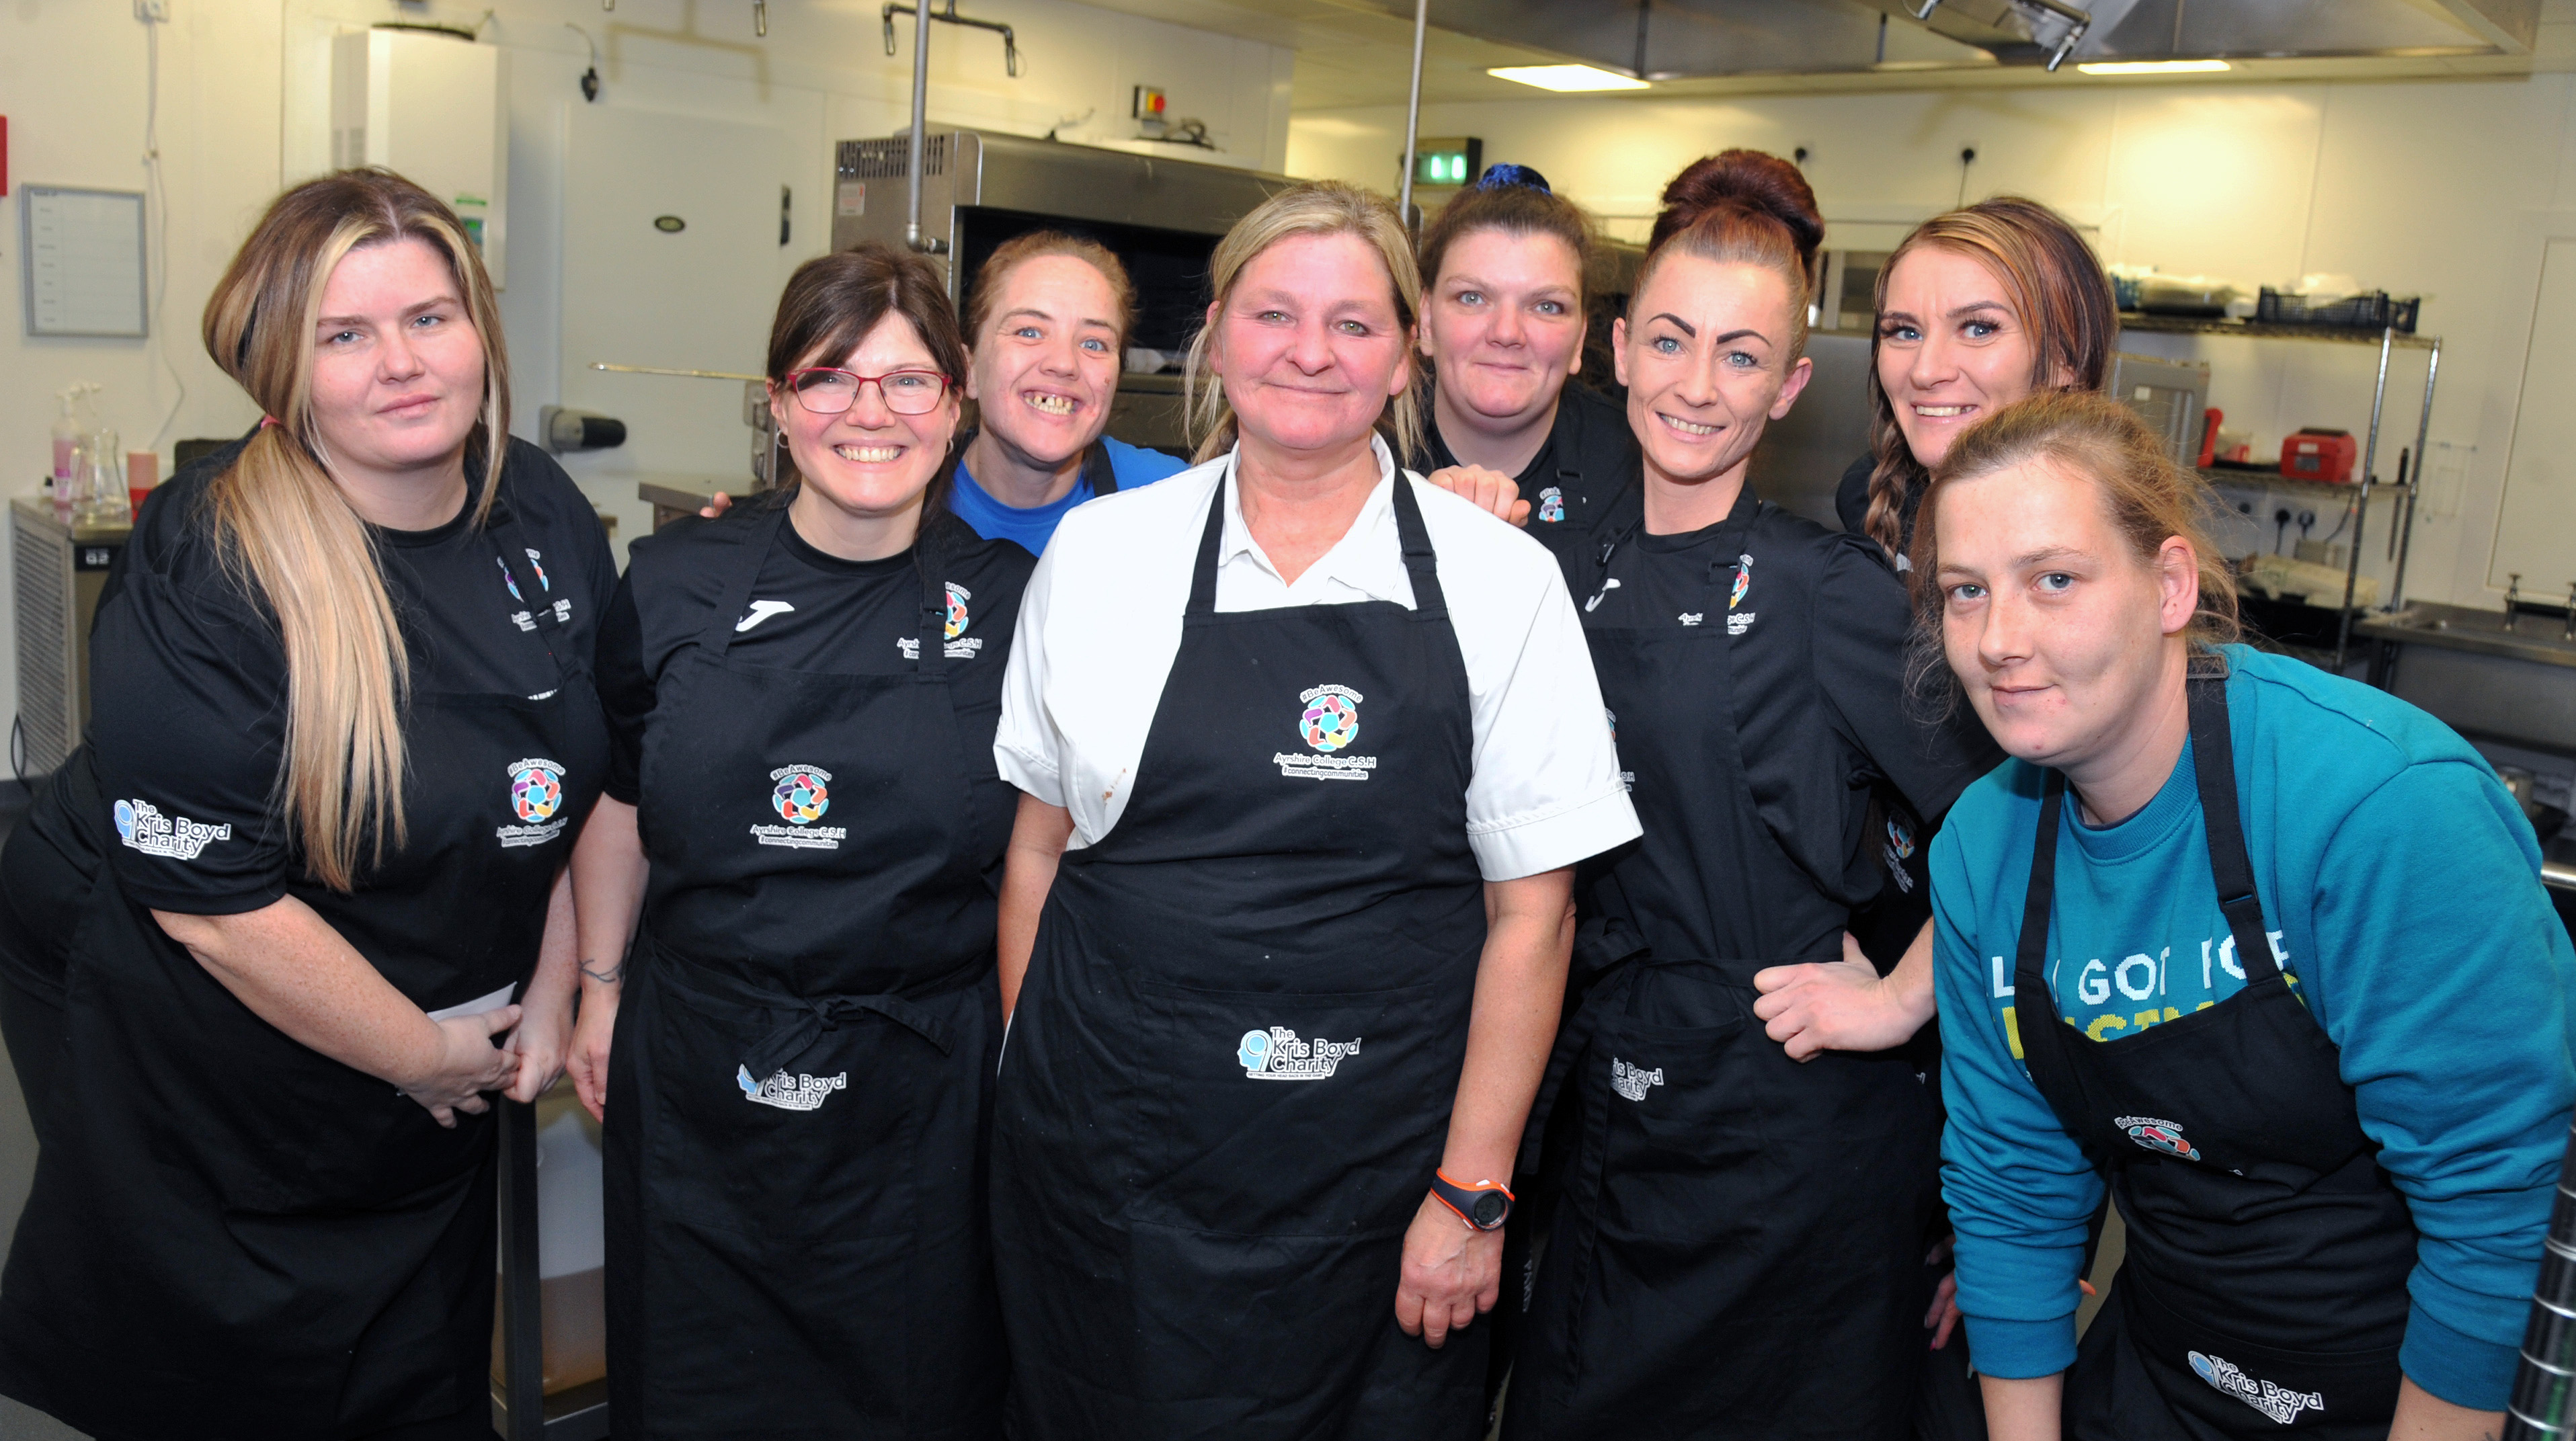 Parents complete Ayrshire College’s BeAwesome Family Food Programme